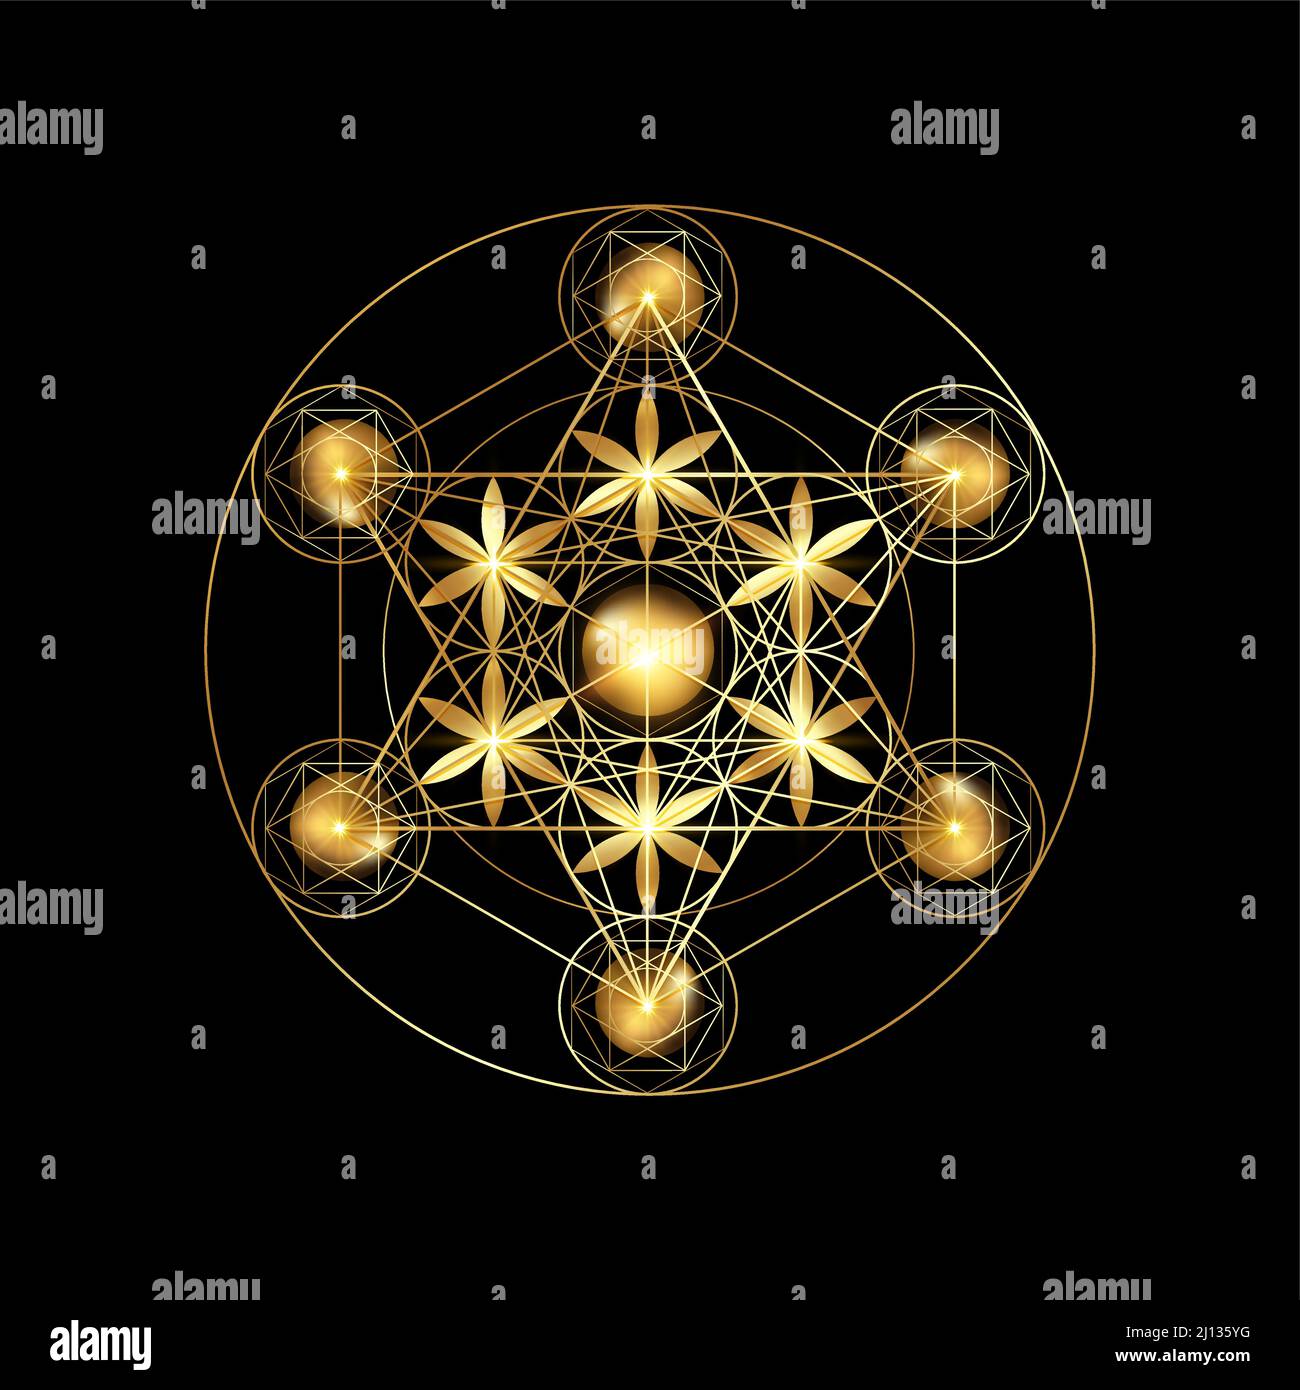 Metatron's Cube,  Flower of Life. Gold Sacred geometry. Mystic golden icon platonic solids Merkabah, abstract geometric drawing, crop circles sign Stock Vector